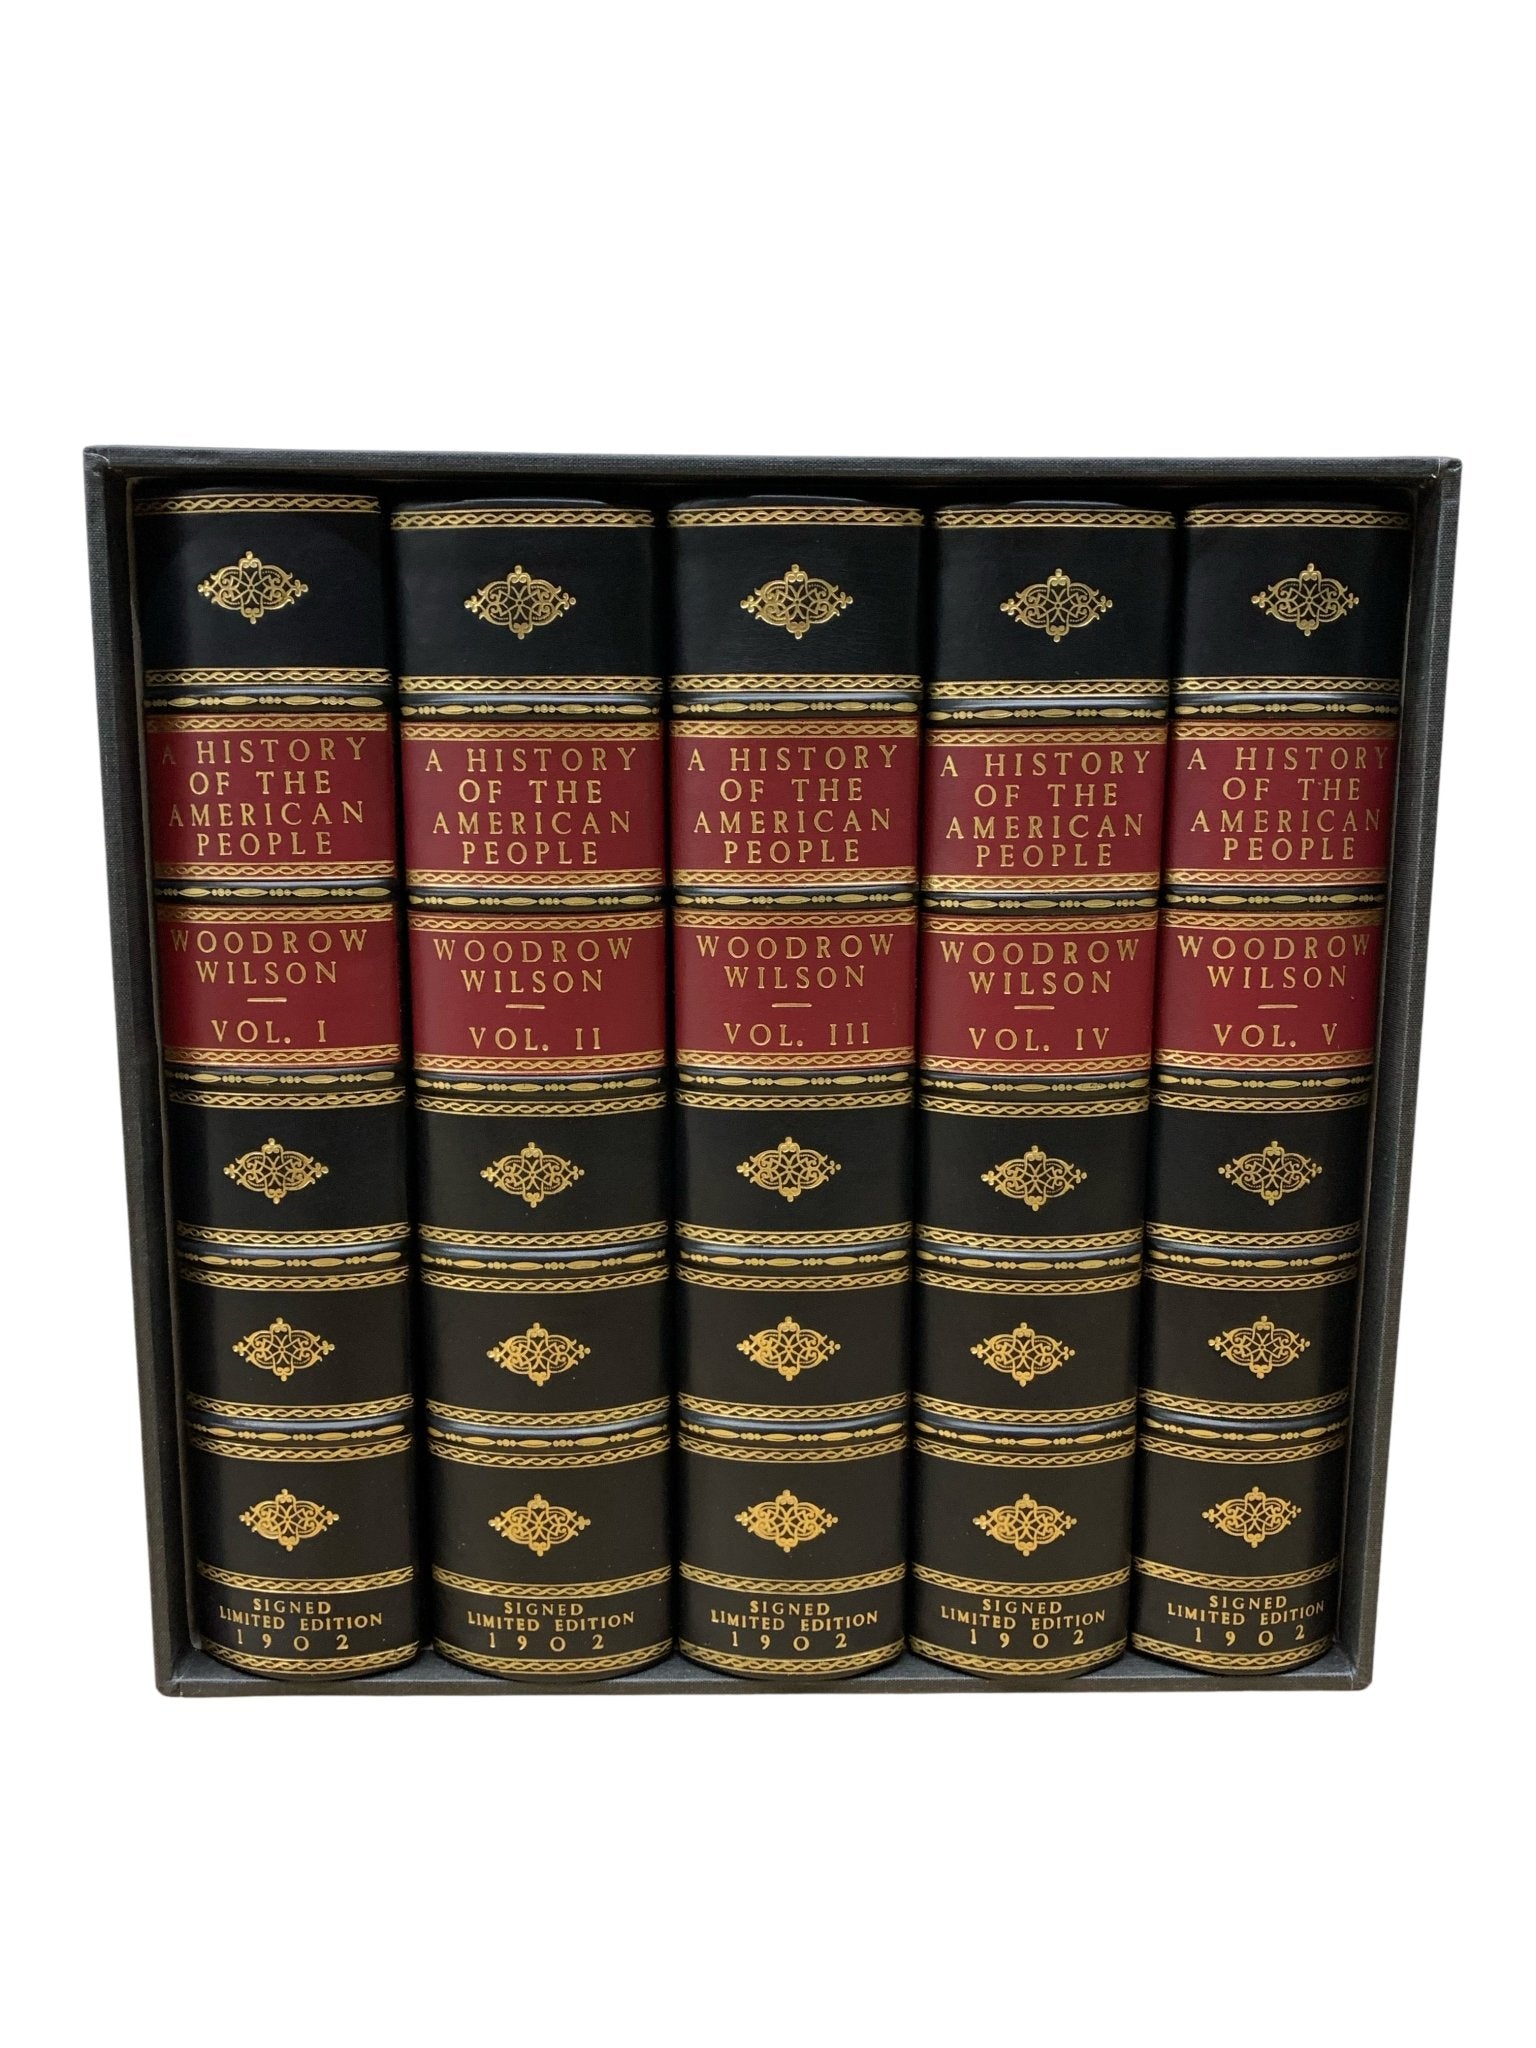 A History of the American People, Signed by Woodrow Wilson, Alumni Edition #29 of 350, Five Volume Set, 1902 - The Great Republic